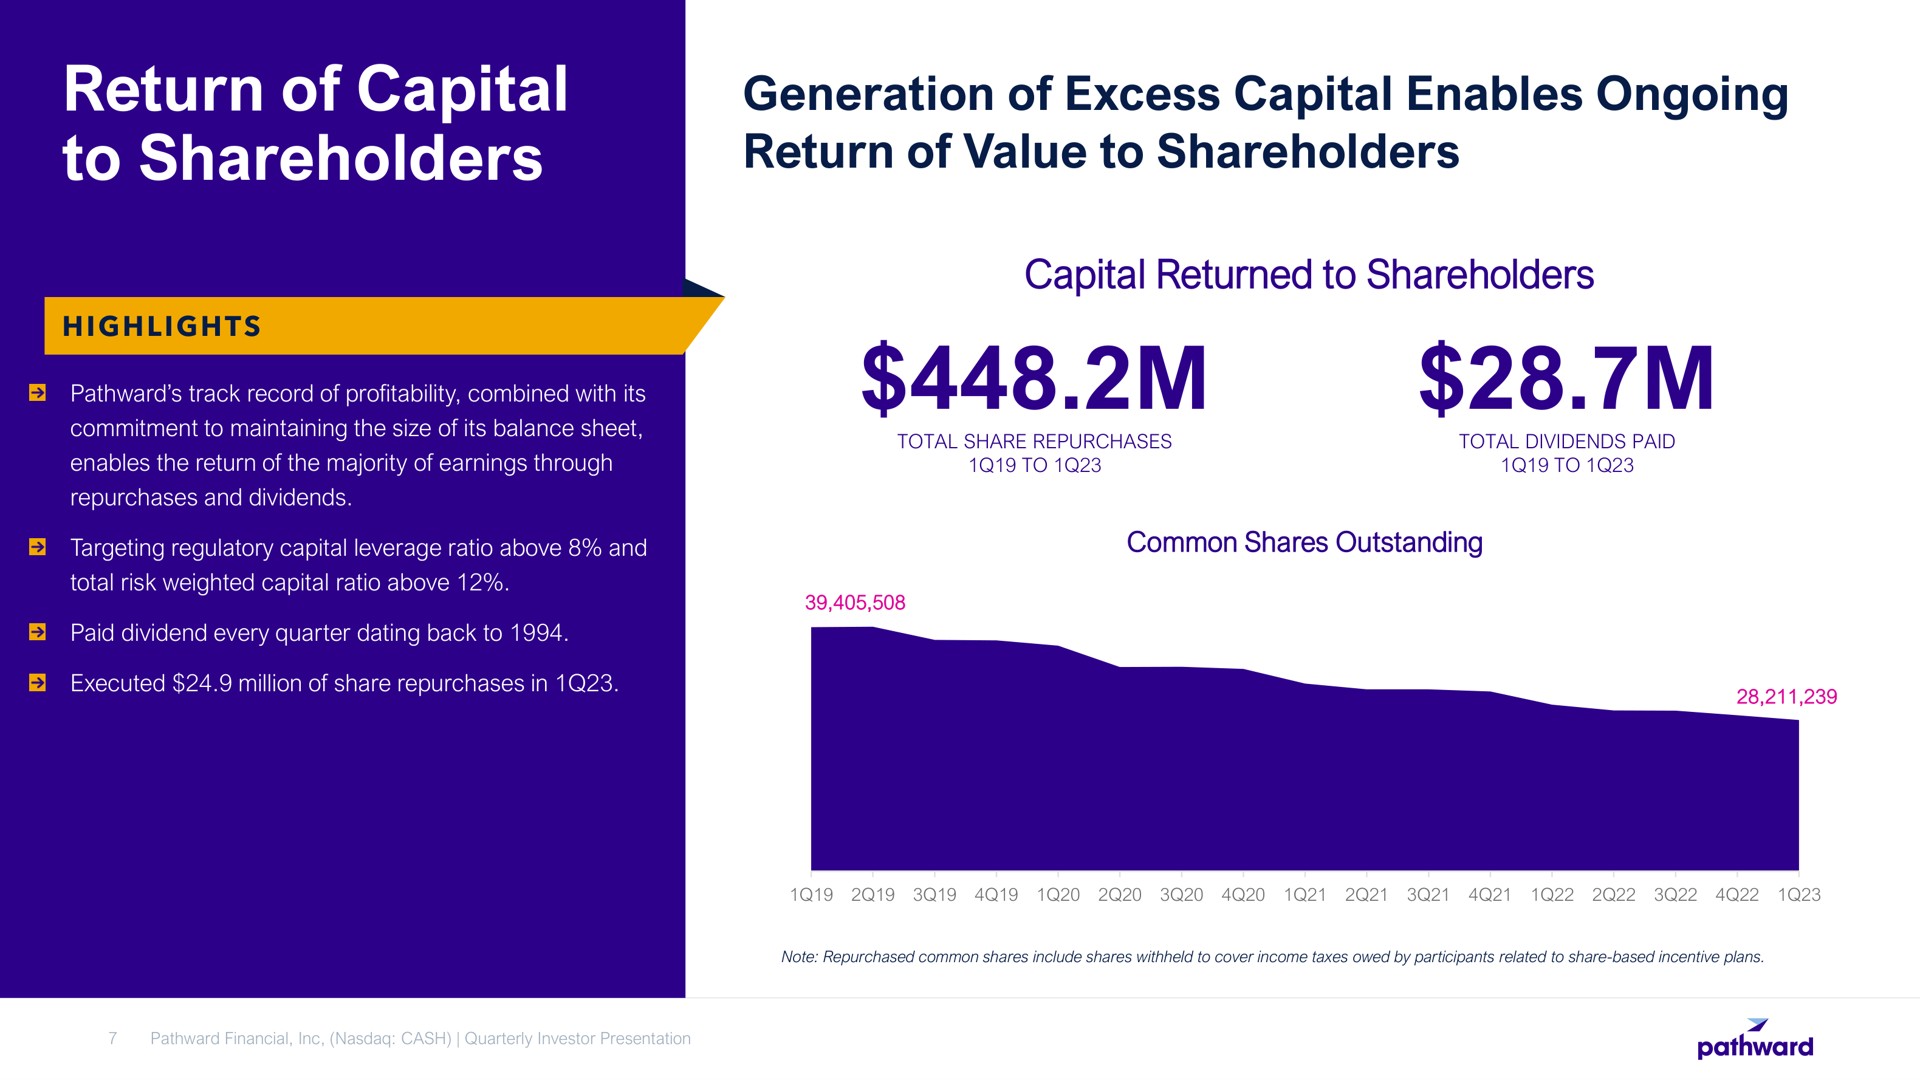 return of capital to shareholders generation of excess capital enables ongoing return of value to shareholders capital returned to shareholders highlights | Pathward Financial